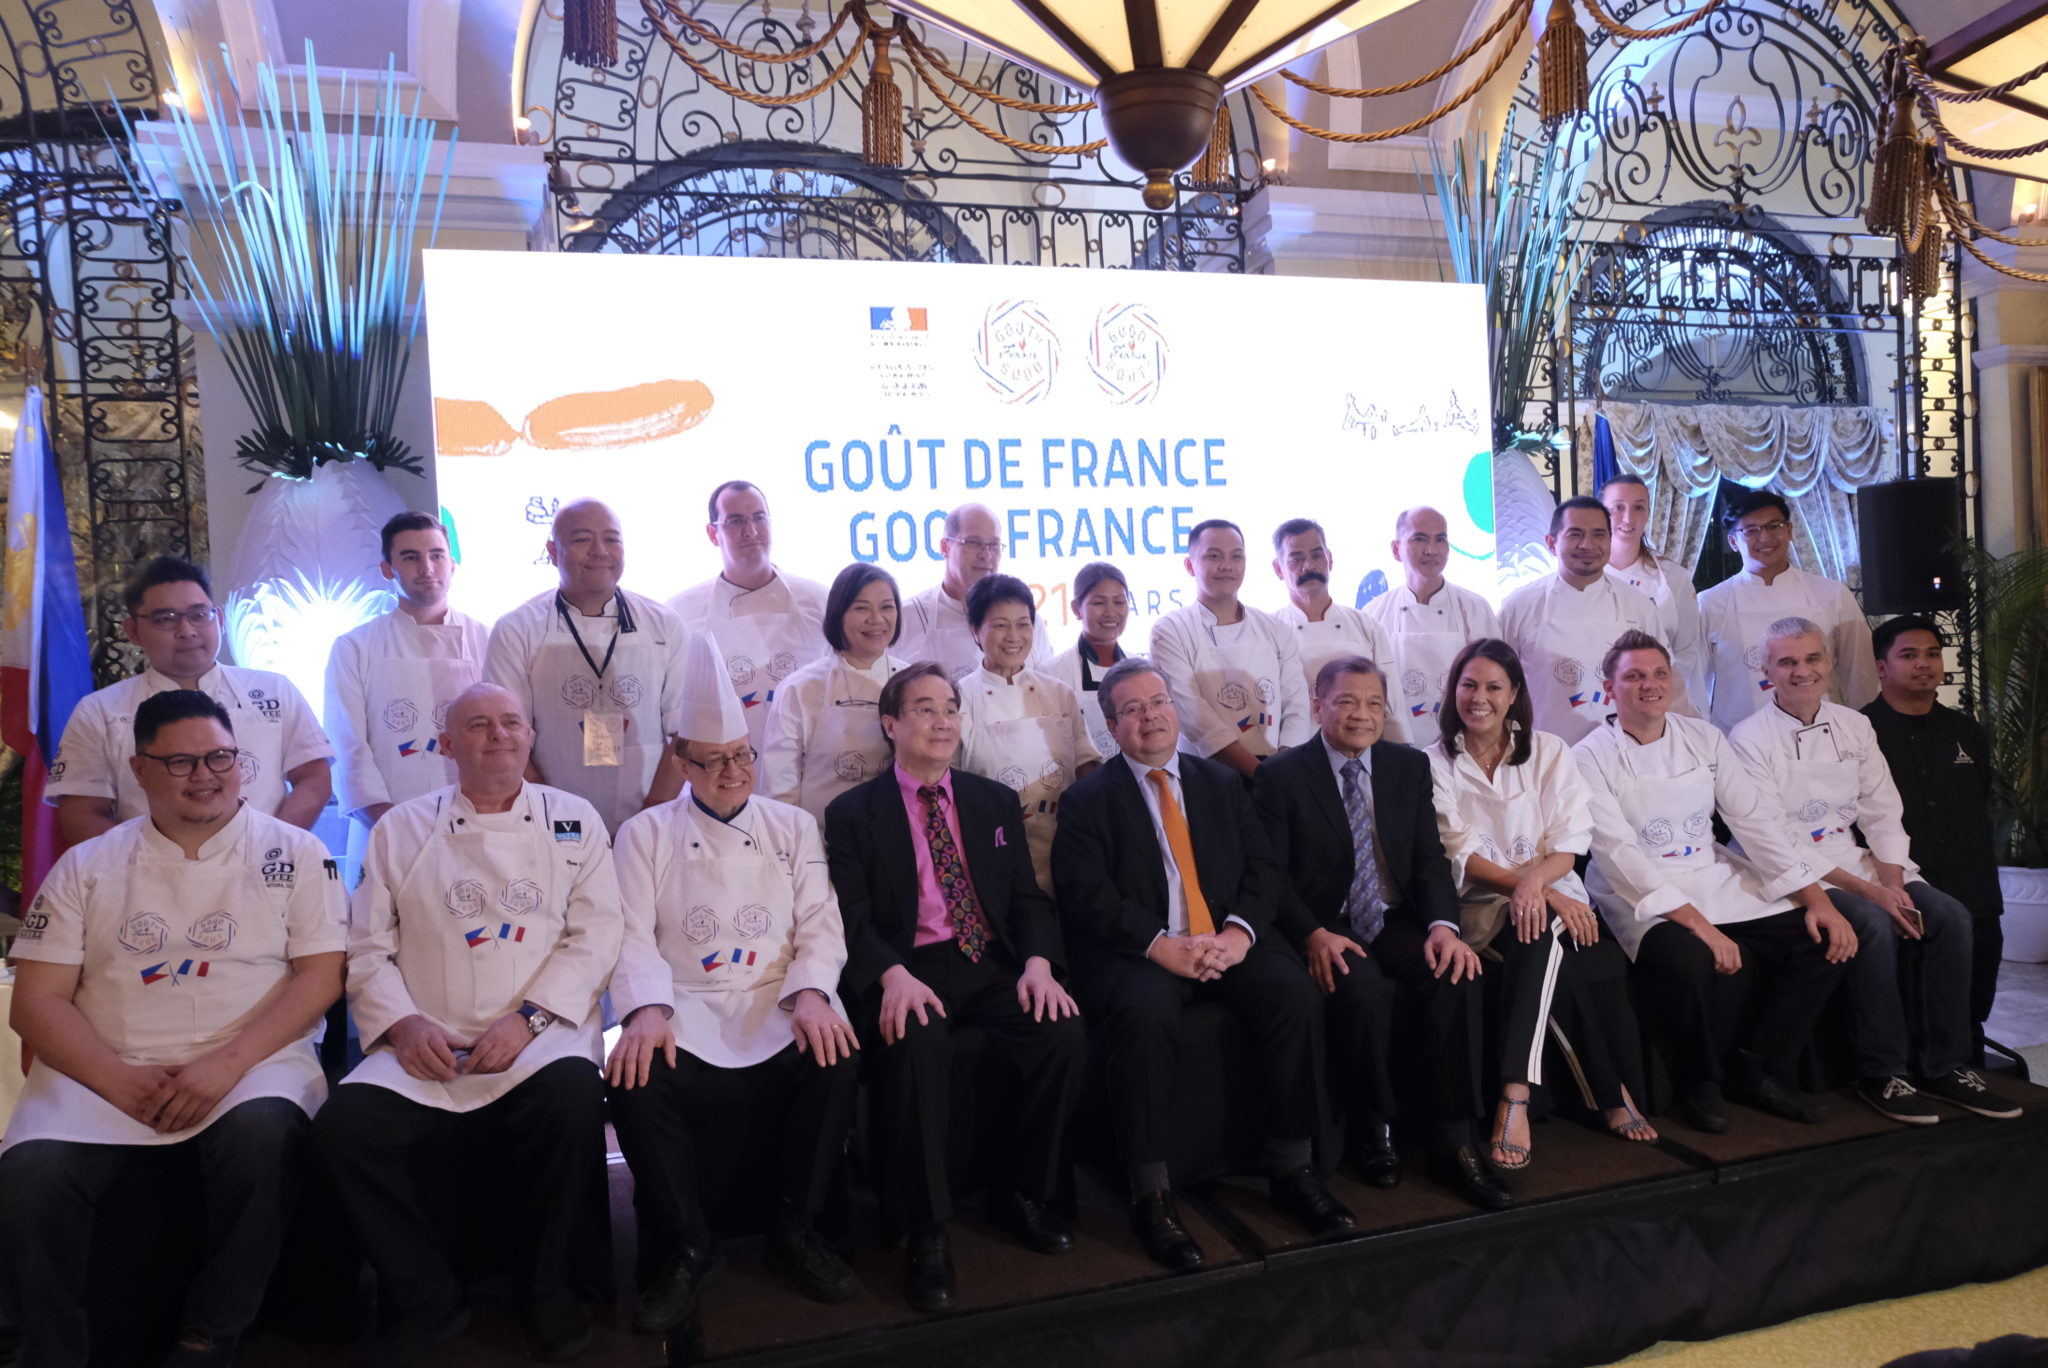 The biggest French dinner in the world, Goût de France/Good France, returns to the Philippines on March 21